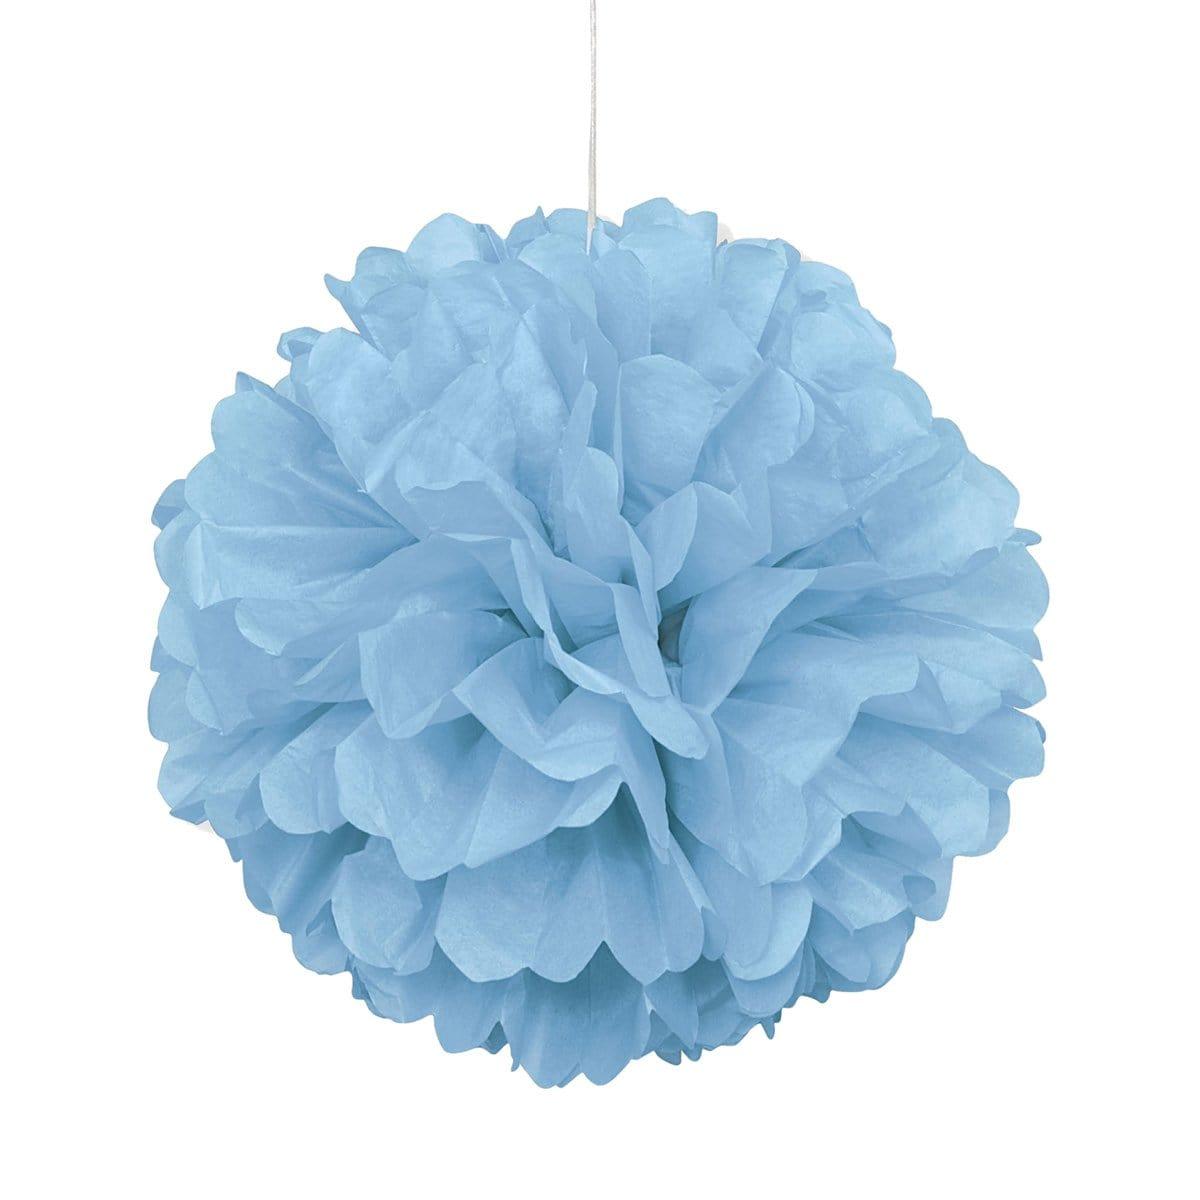 Buy Decorations Puff Decor - Powder Blue 16 in. sold at Party Expert